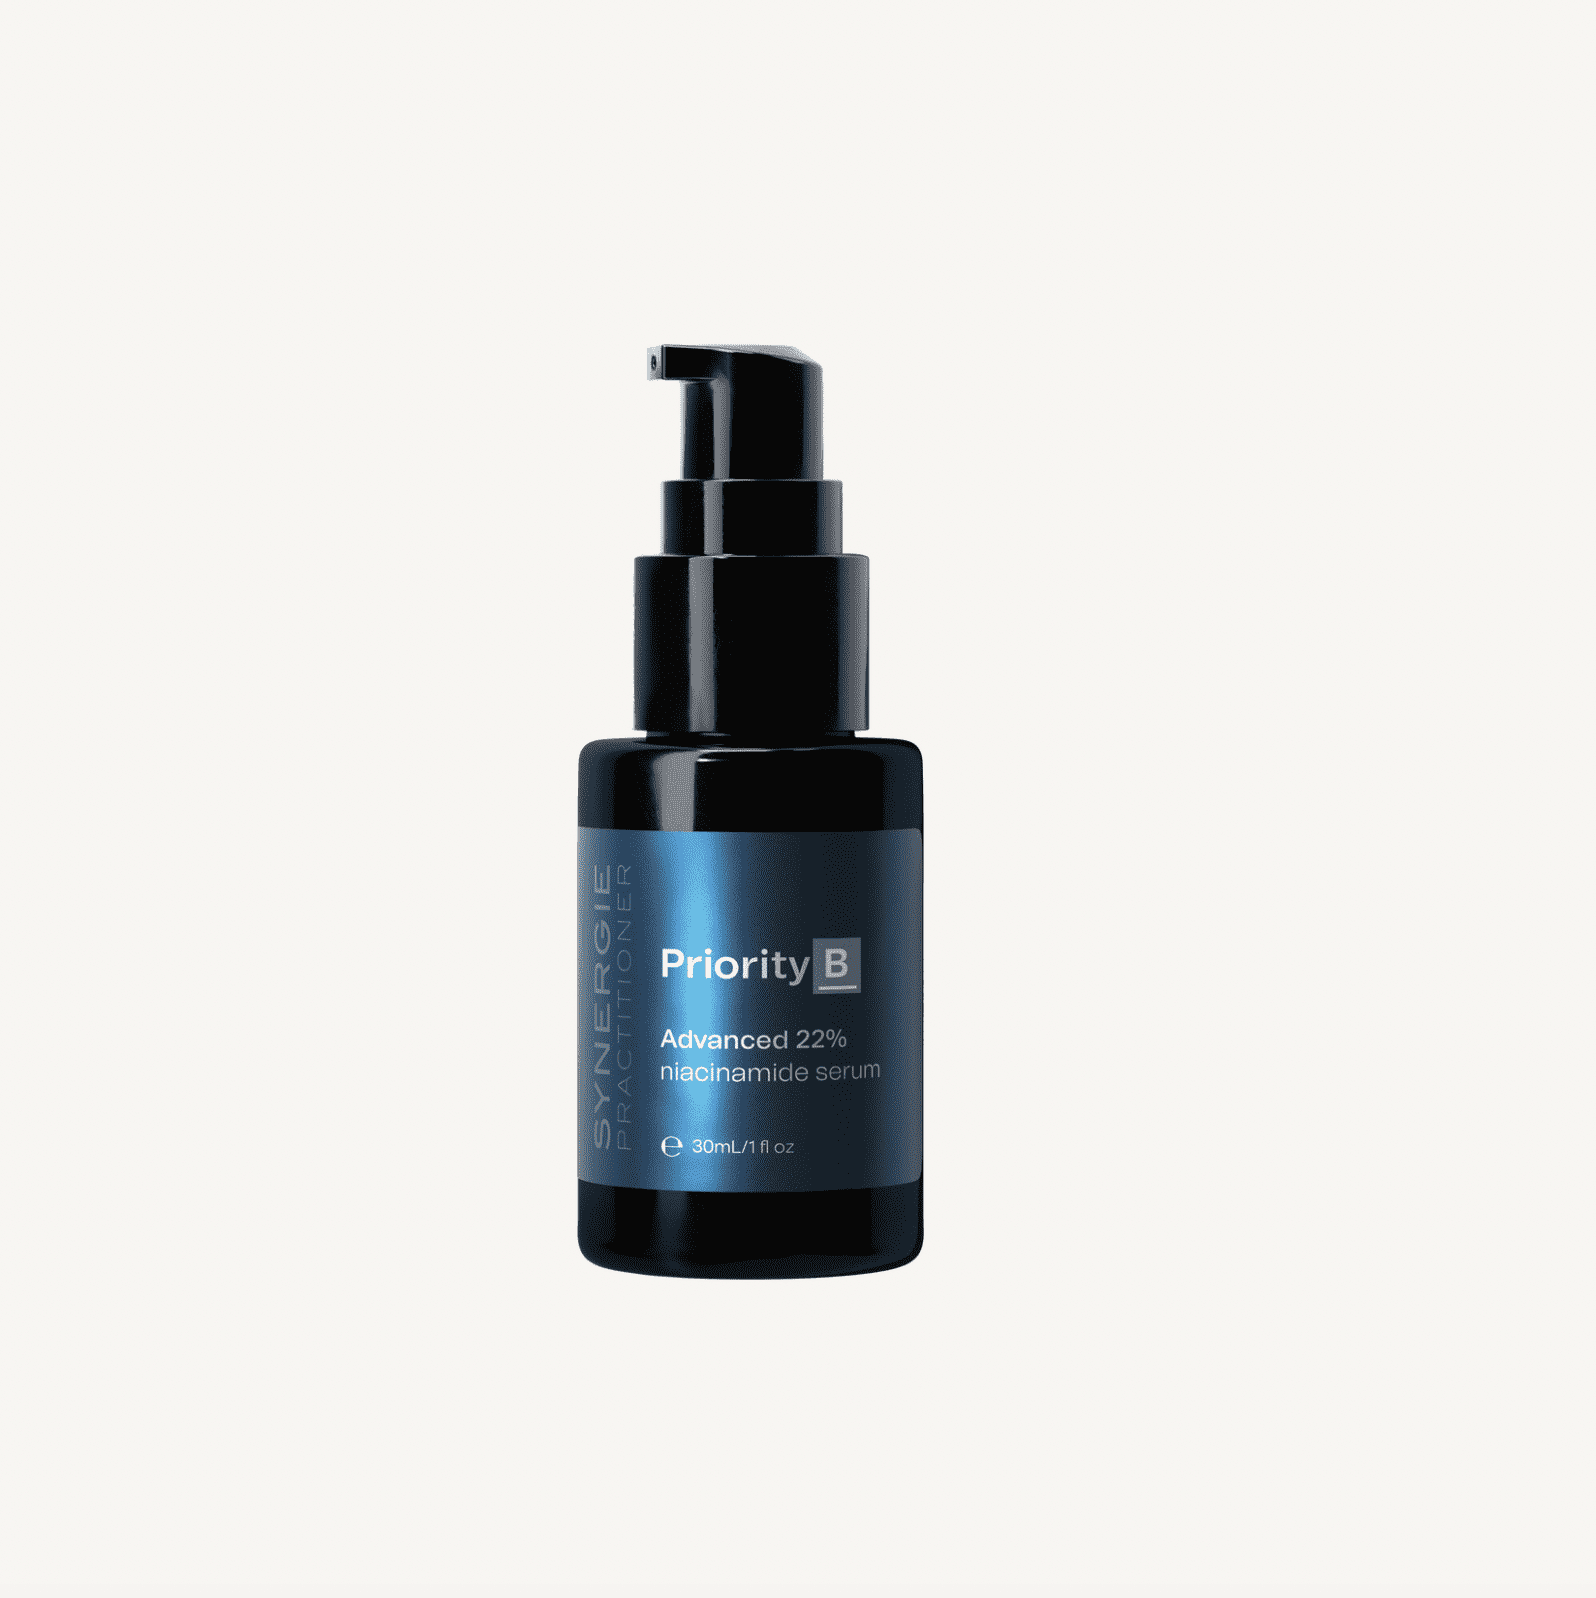 A dark blue bottle of strivectin priority b advanced 22% niacinamide serum with a black pump dispenser, isolated on a white background.